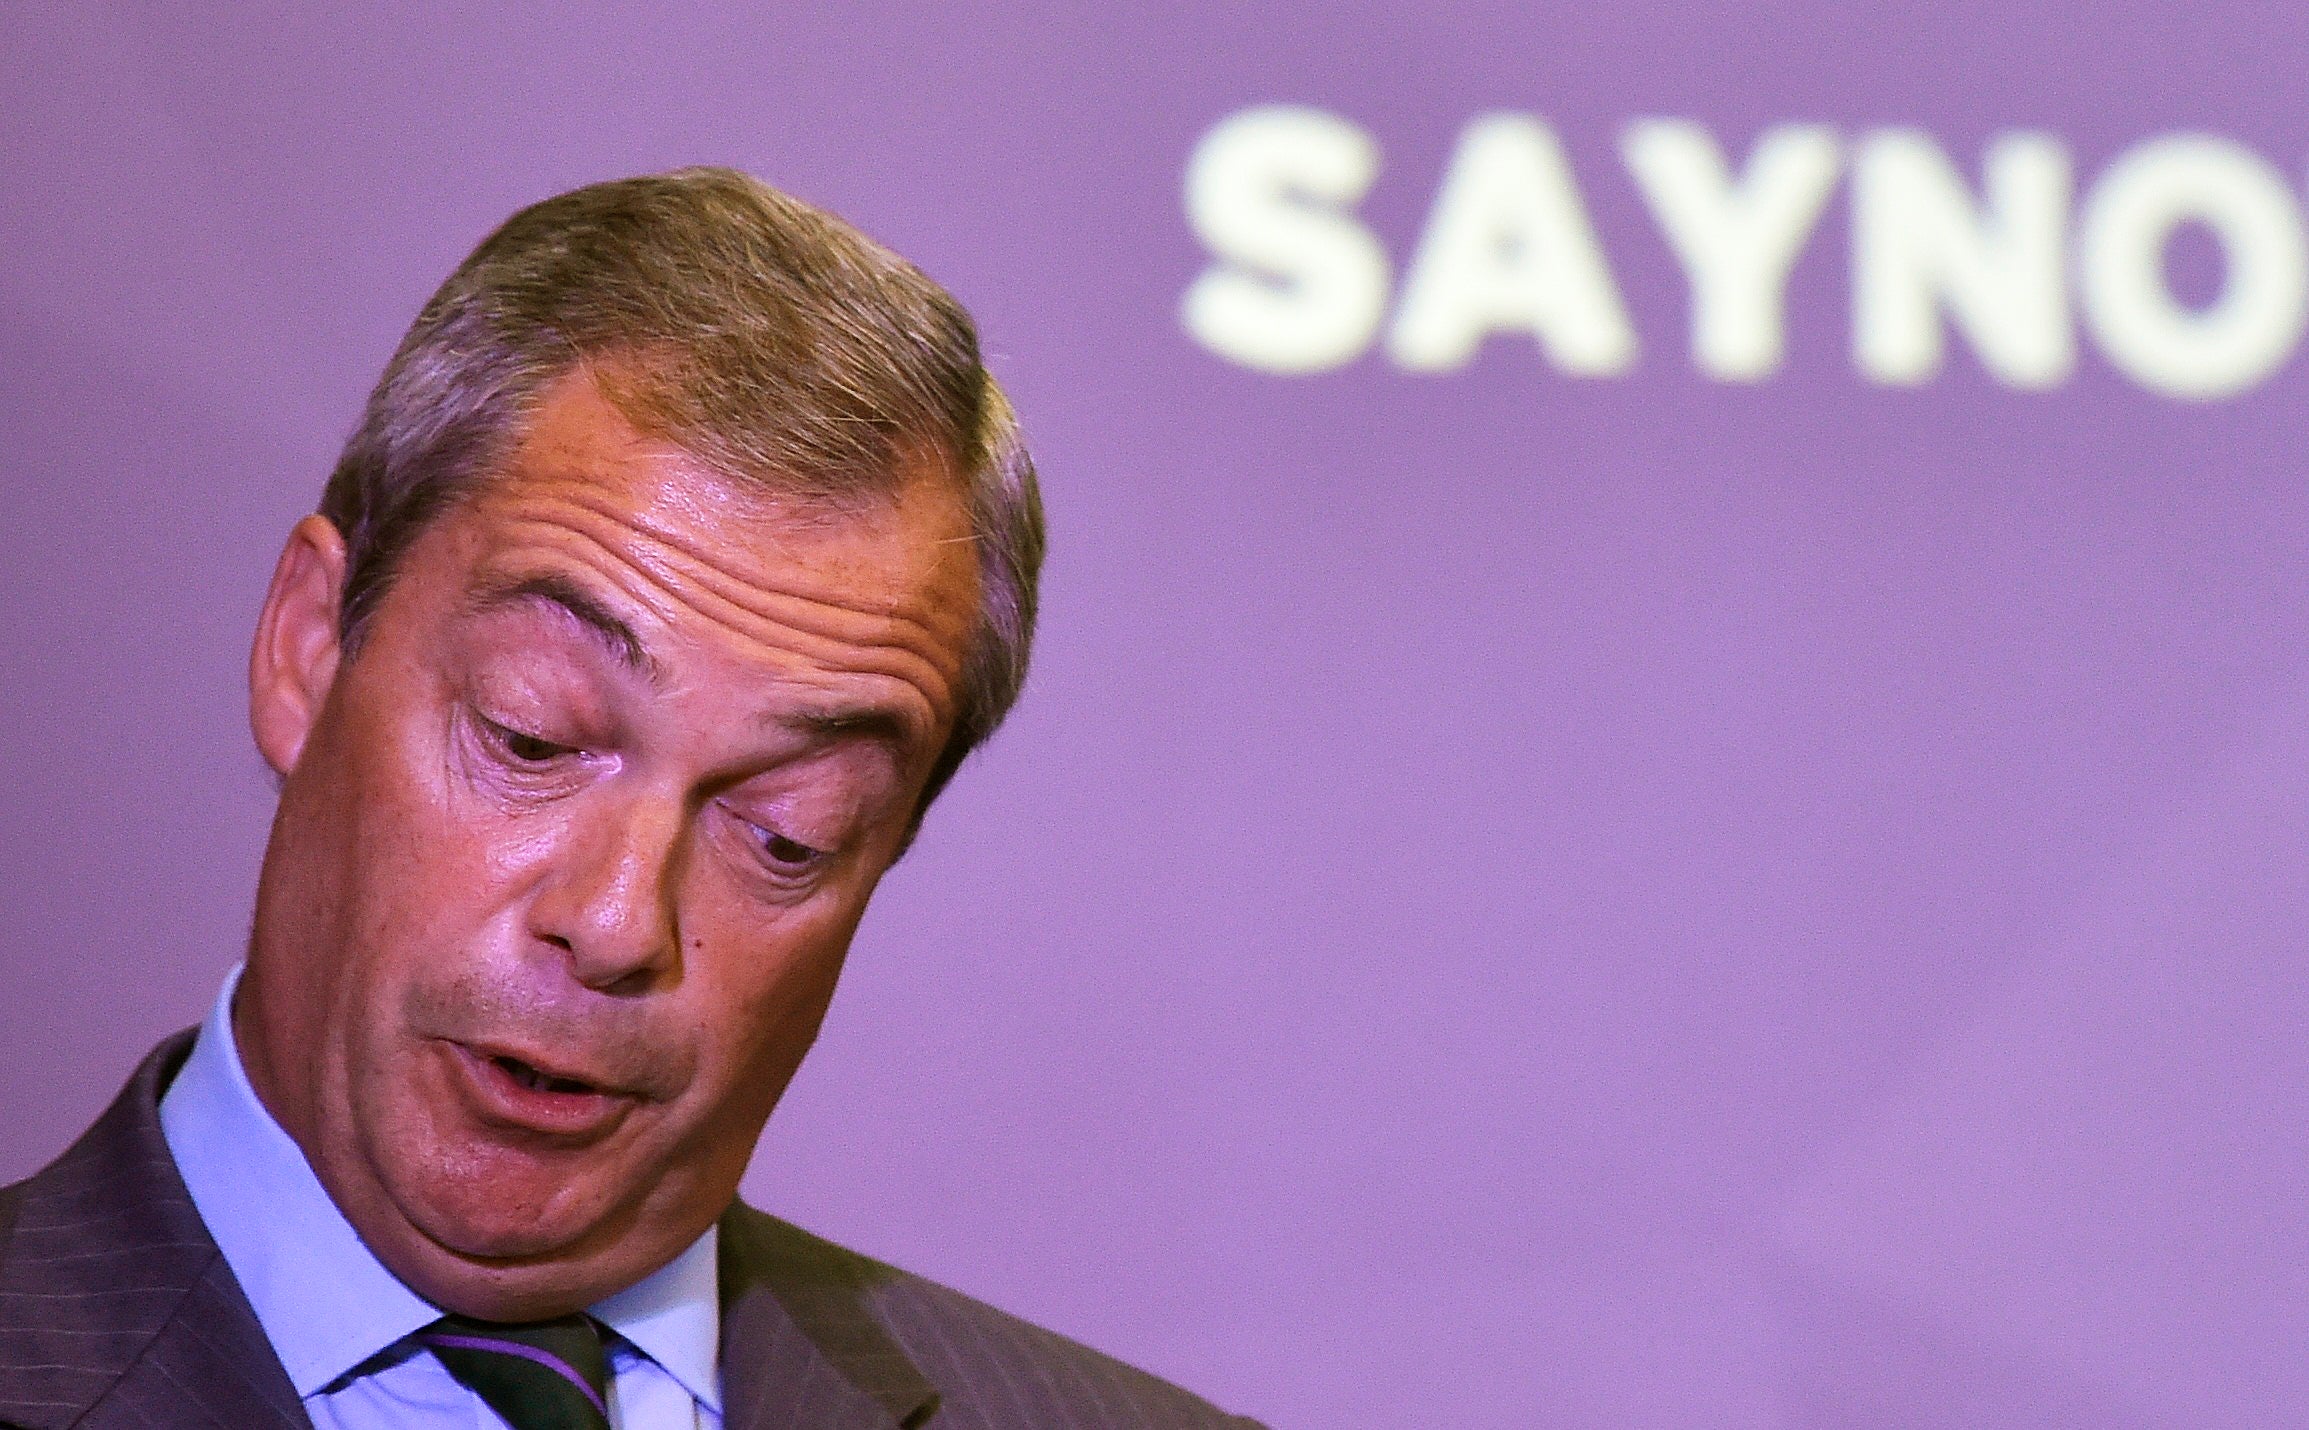 Ukip leader Nigel Farage has been invited onto the debate instead a representative from Vote Leave